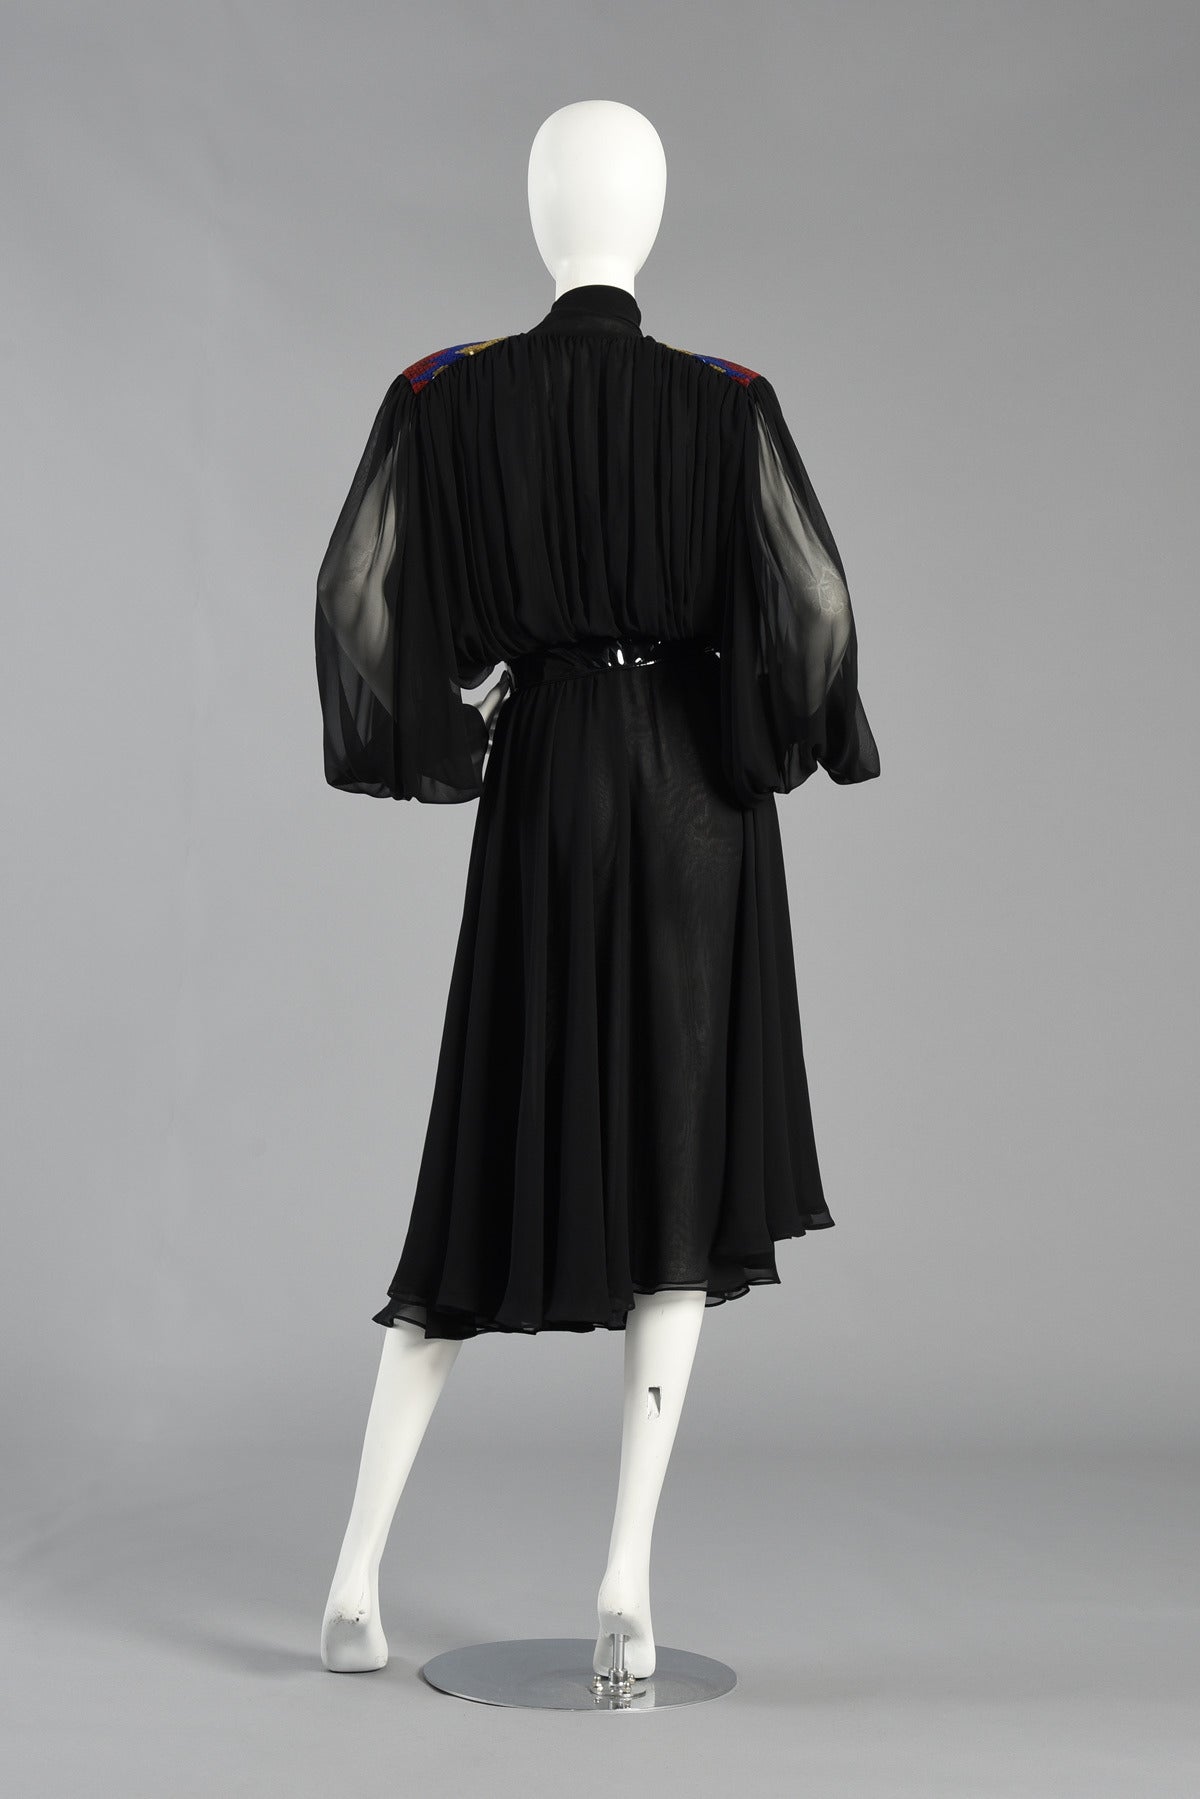 Stunning Wayne Clark Silk Dress with Beaded Details and Blouson Sleeves For Sale 6